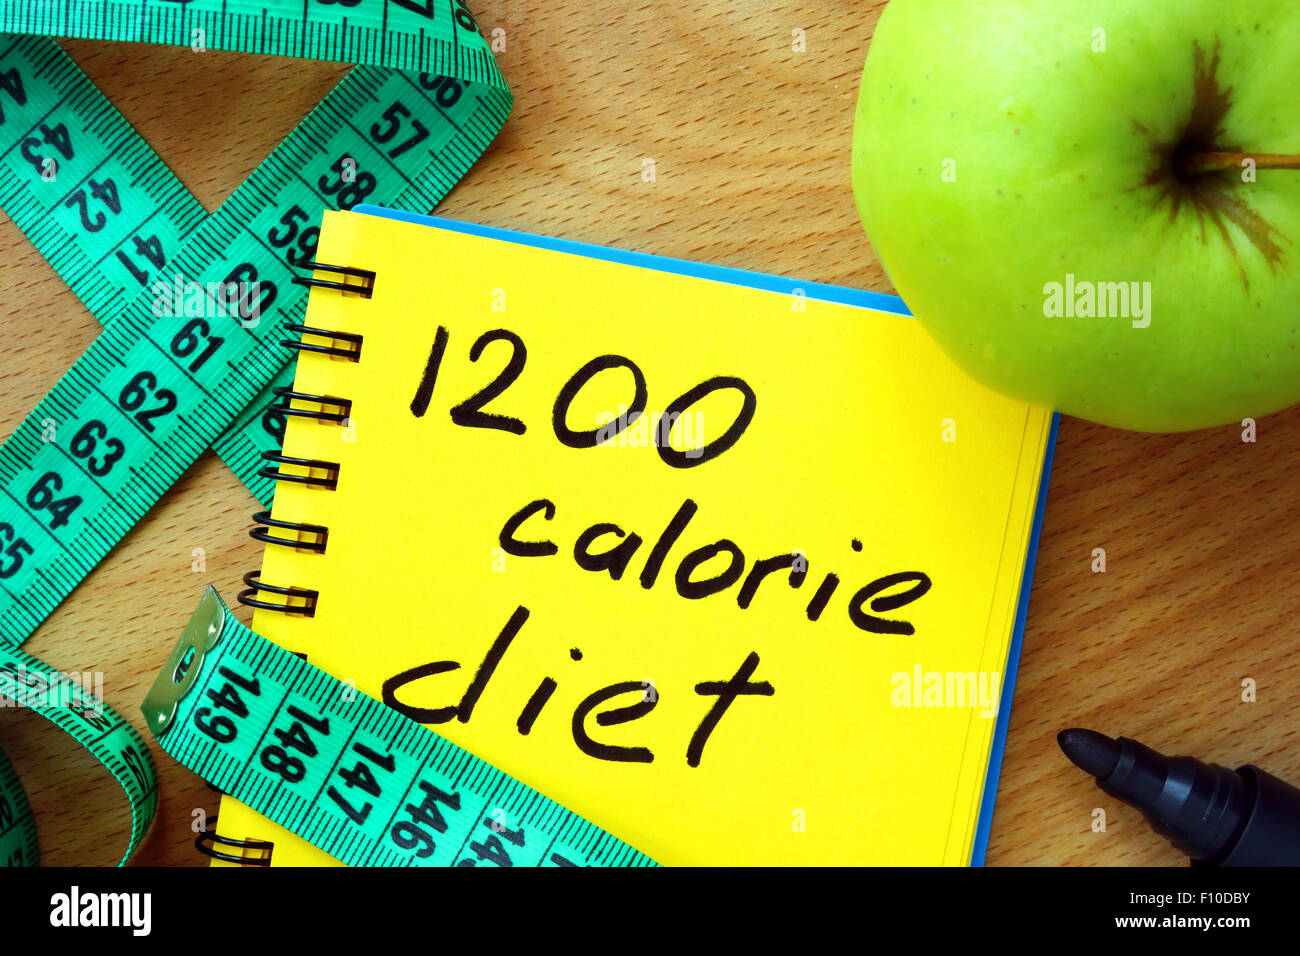 Notepad with 1200 calorie diet, apple and measure tape Stock Photo